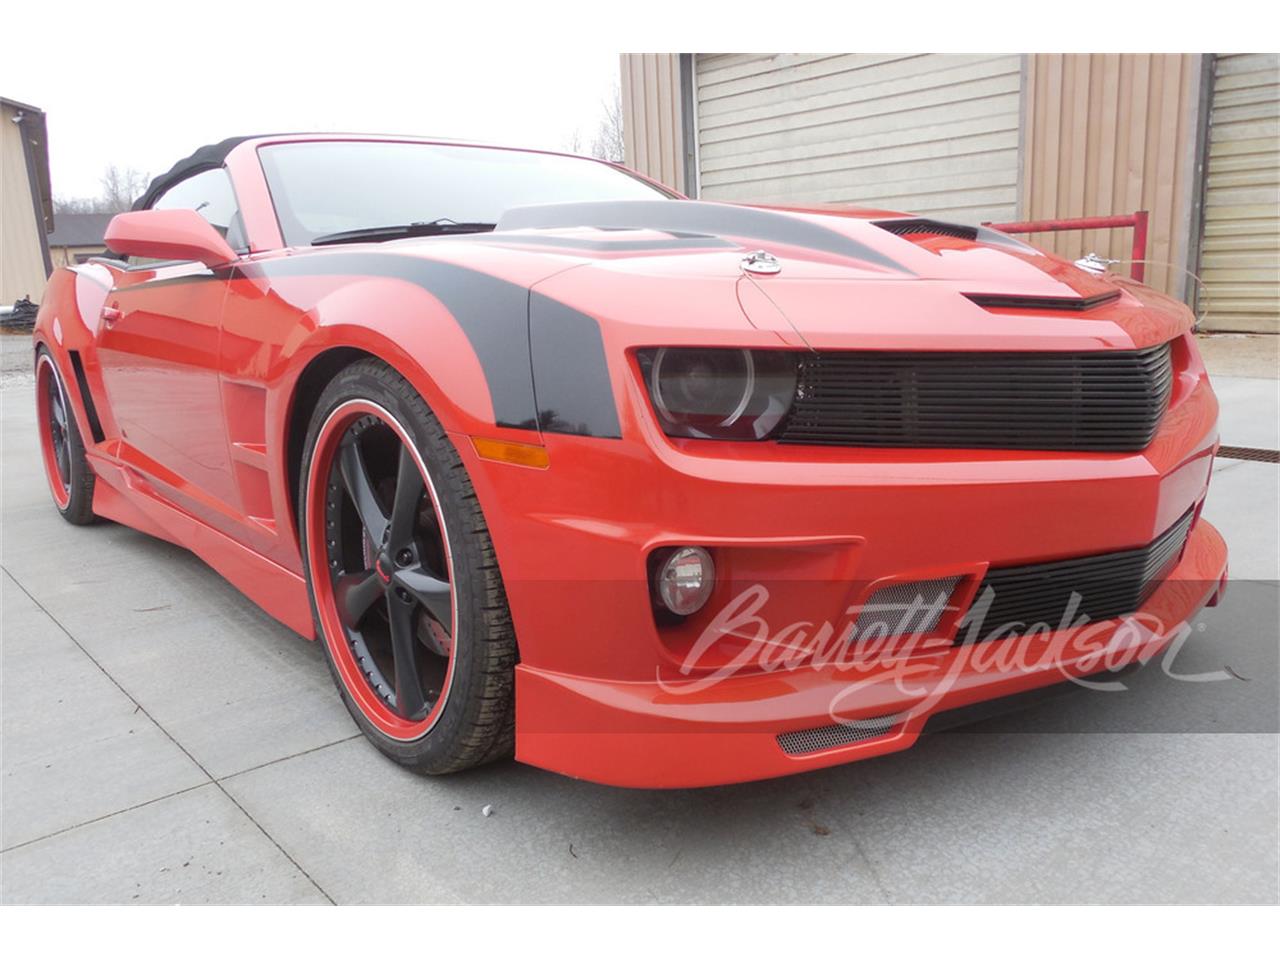 For Sale at Auction: 2012 Chevrolet Camaro in Scottsdale, Arizona for sale in Scottsdale, AZ